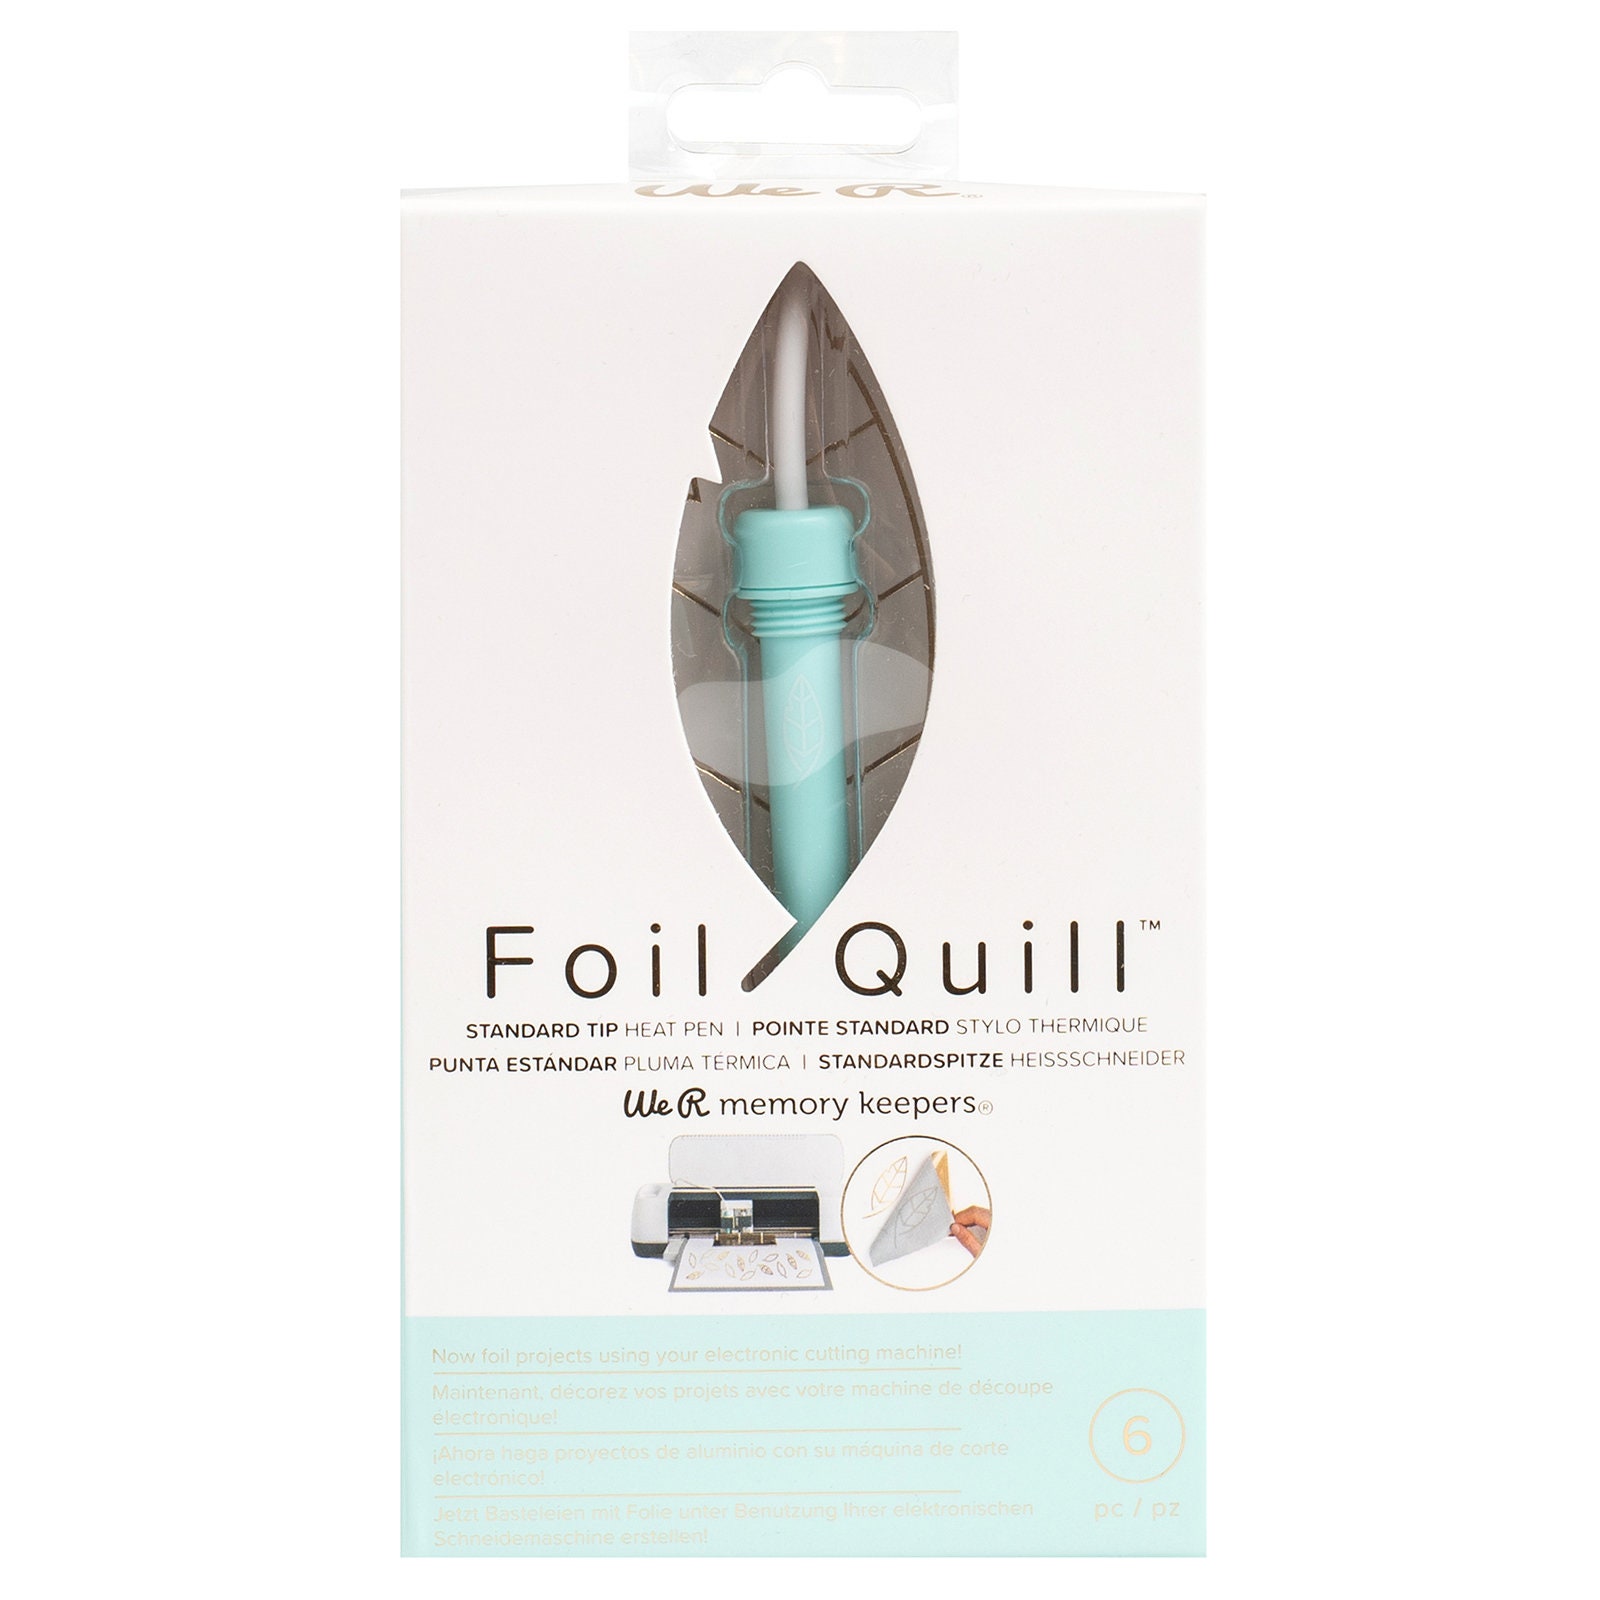 Heated Hot Foil Quill Pen Foil Quill Invitation Tool Kit Apply Foil To  Cards Scrapbooking DIY Handmade Craft Foil Roll